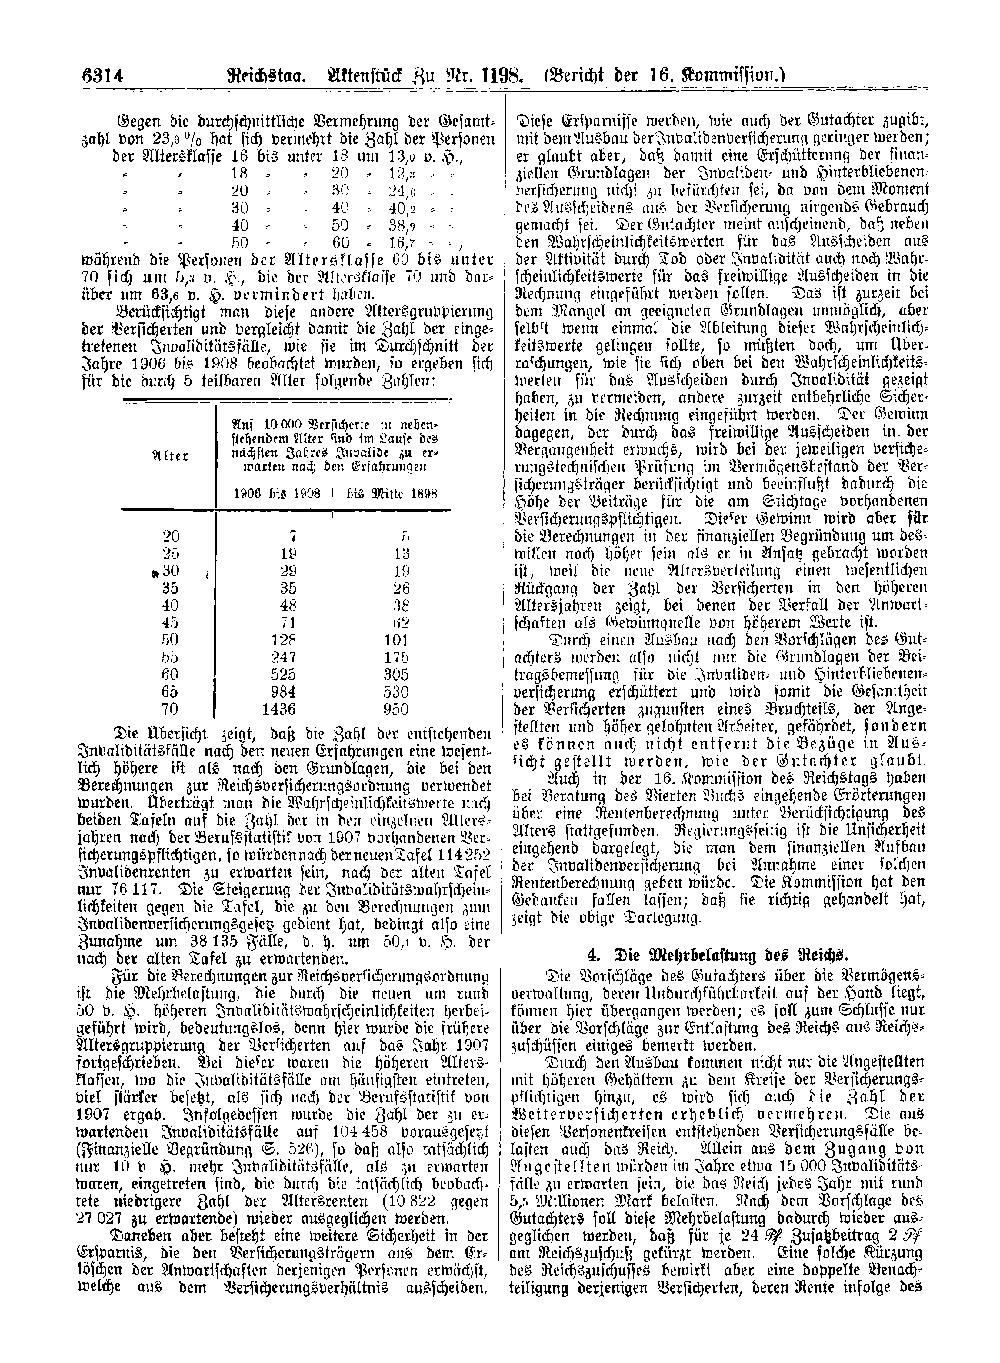 Scan of page 6314